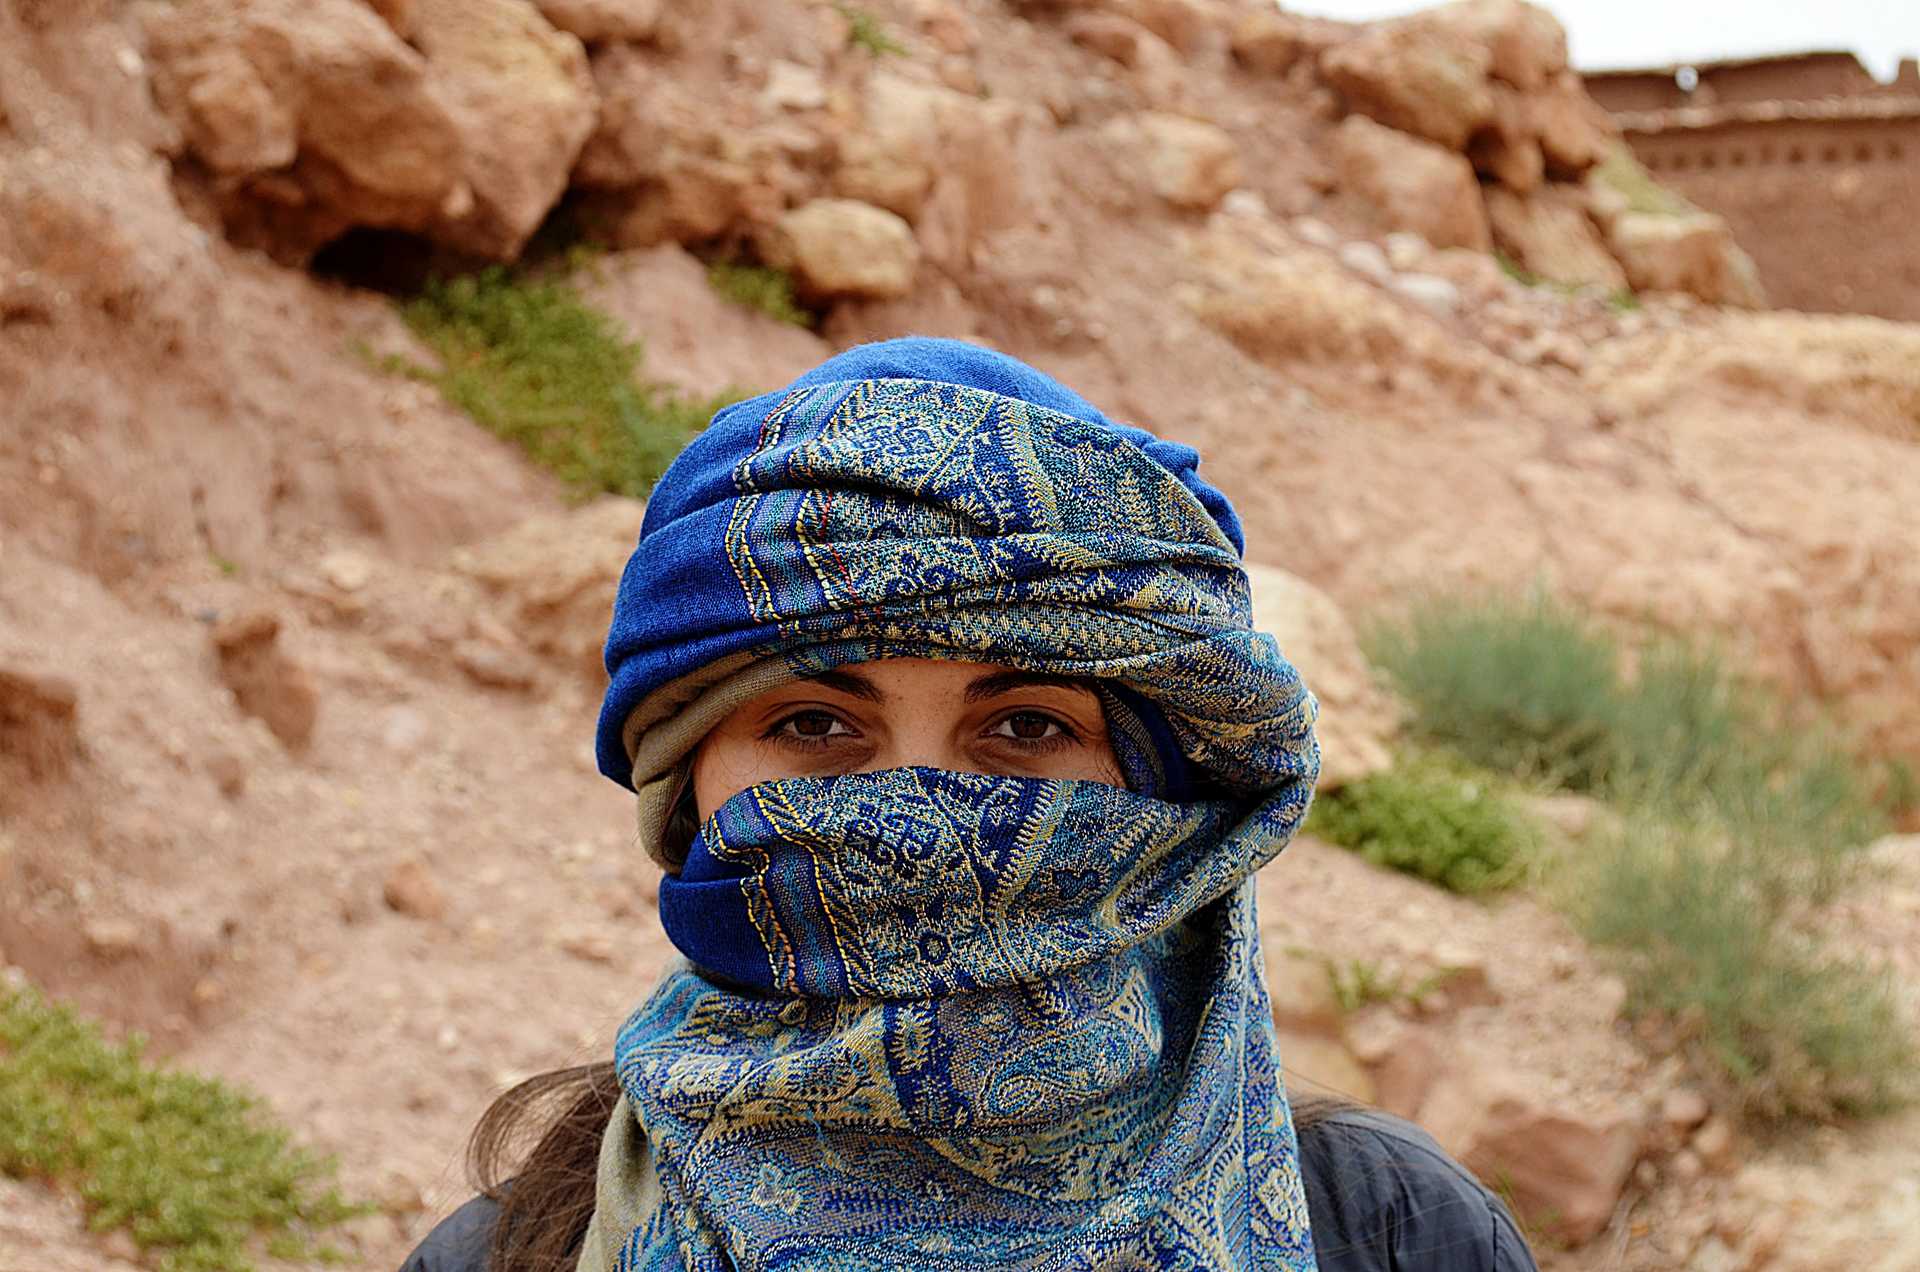 Lady in the desert, Morocco